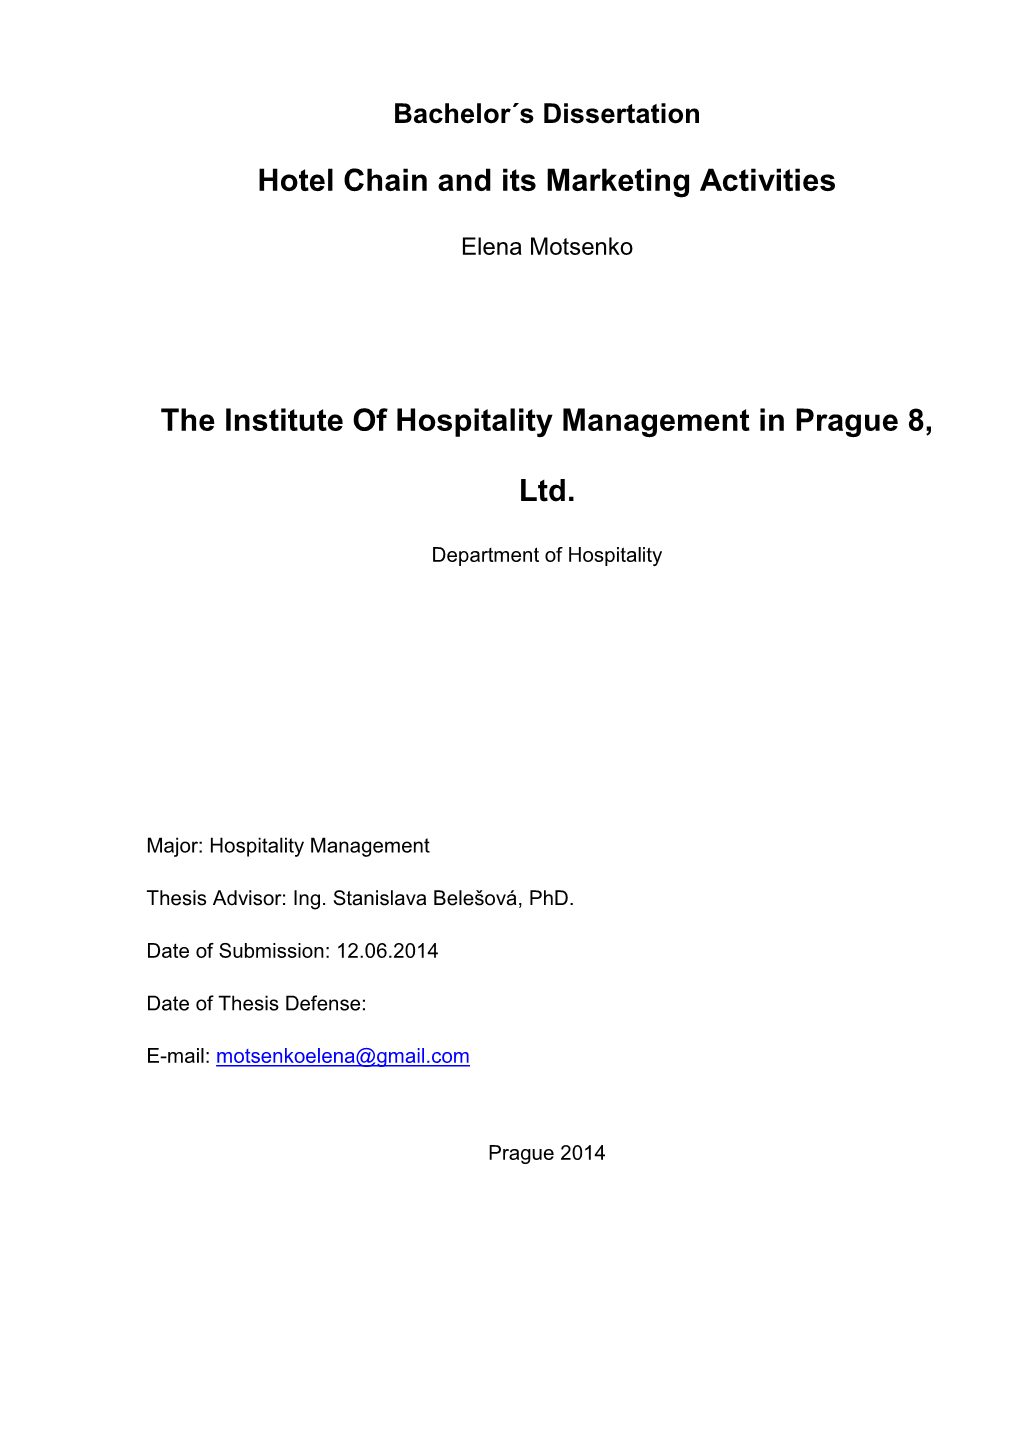 Hotel Chain and Its Marketing Activities the Institute of Hospitality